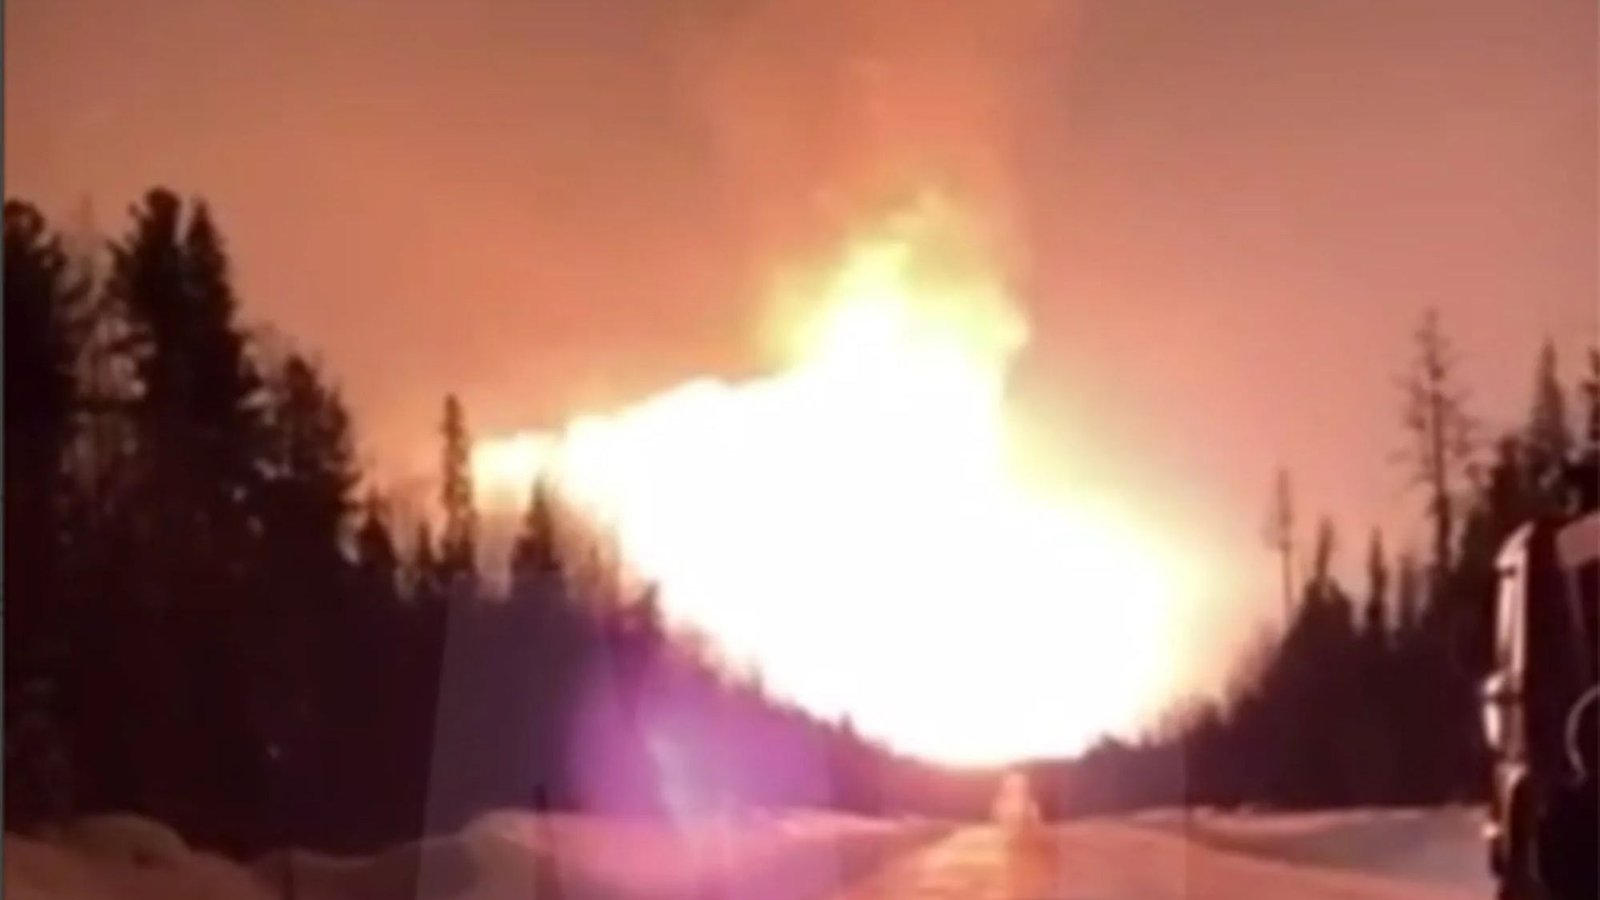 Putin’s key gas pipeline rocked by massive mystery explosion for second time in months sending fireball into the sky